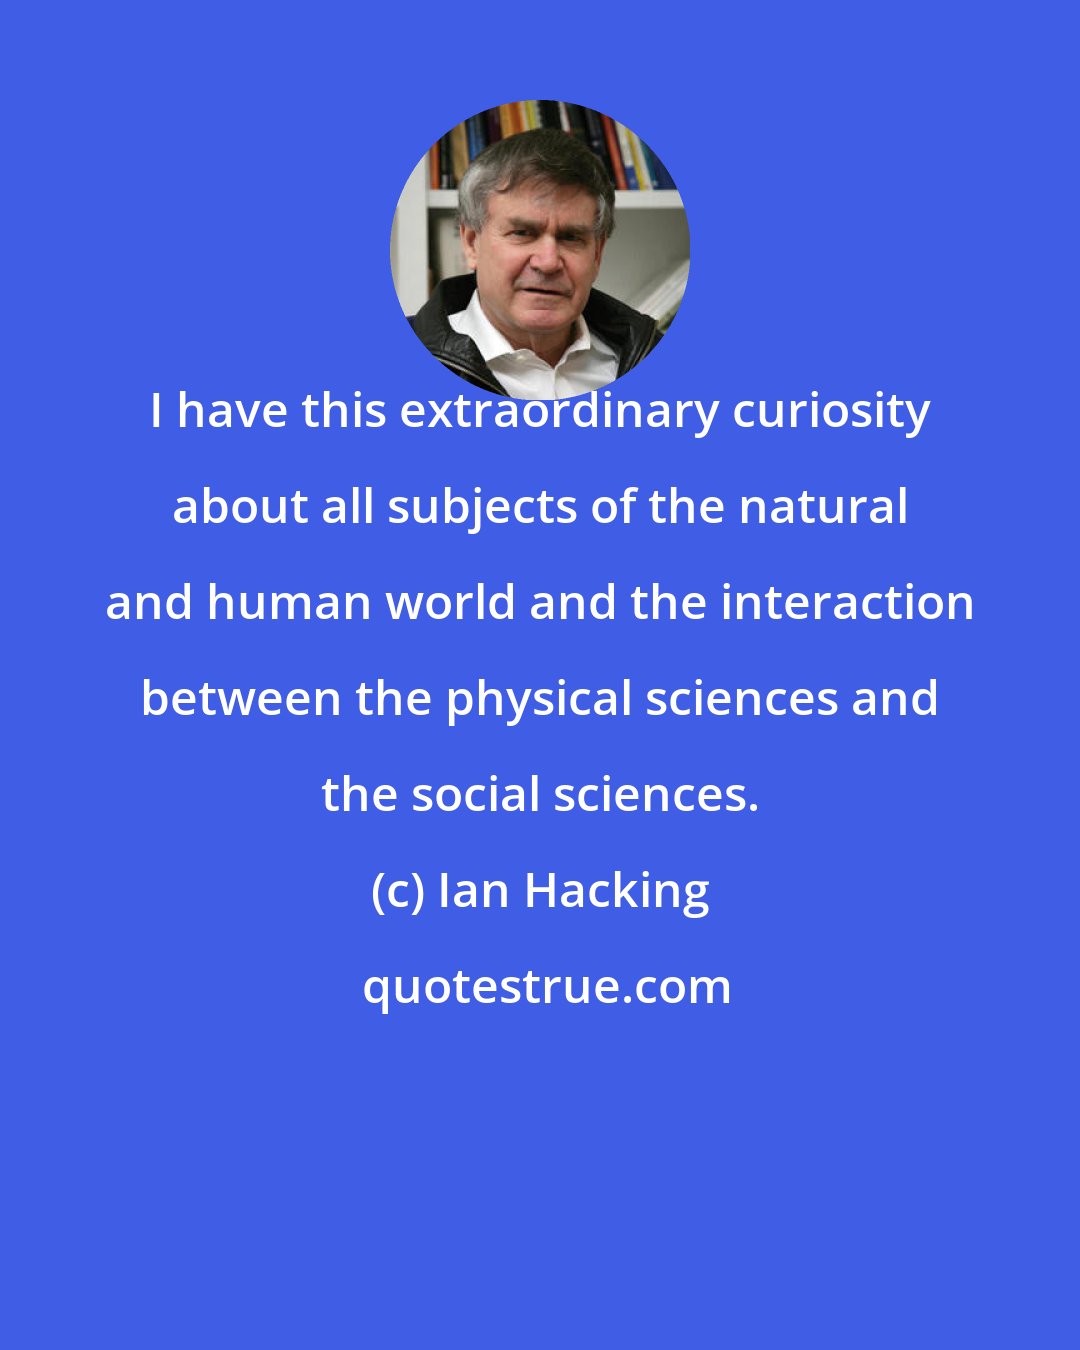 Ian Hacking: I have this extraordinary curiosity about all subjects of the natural and human world and the interaction between the physical sciences and the social sciences.